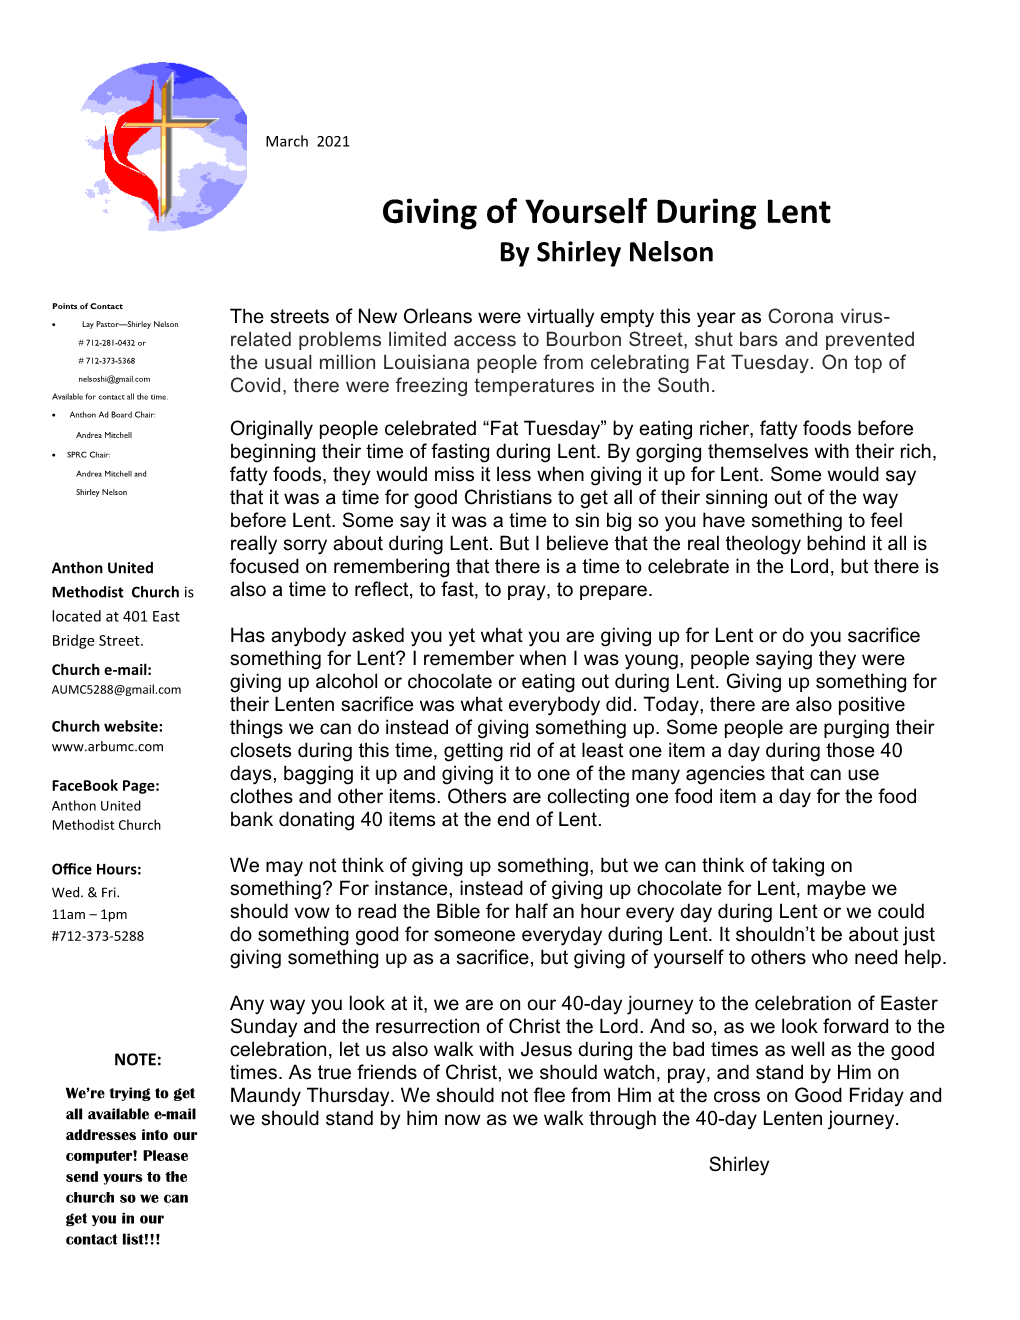 Giving of Yourself During Lent by Shirley Nelson